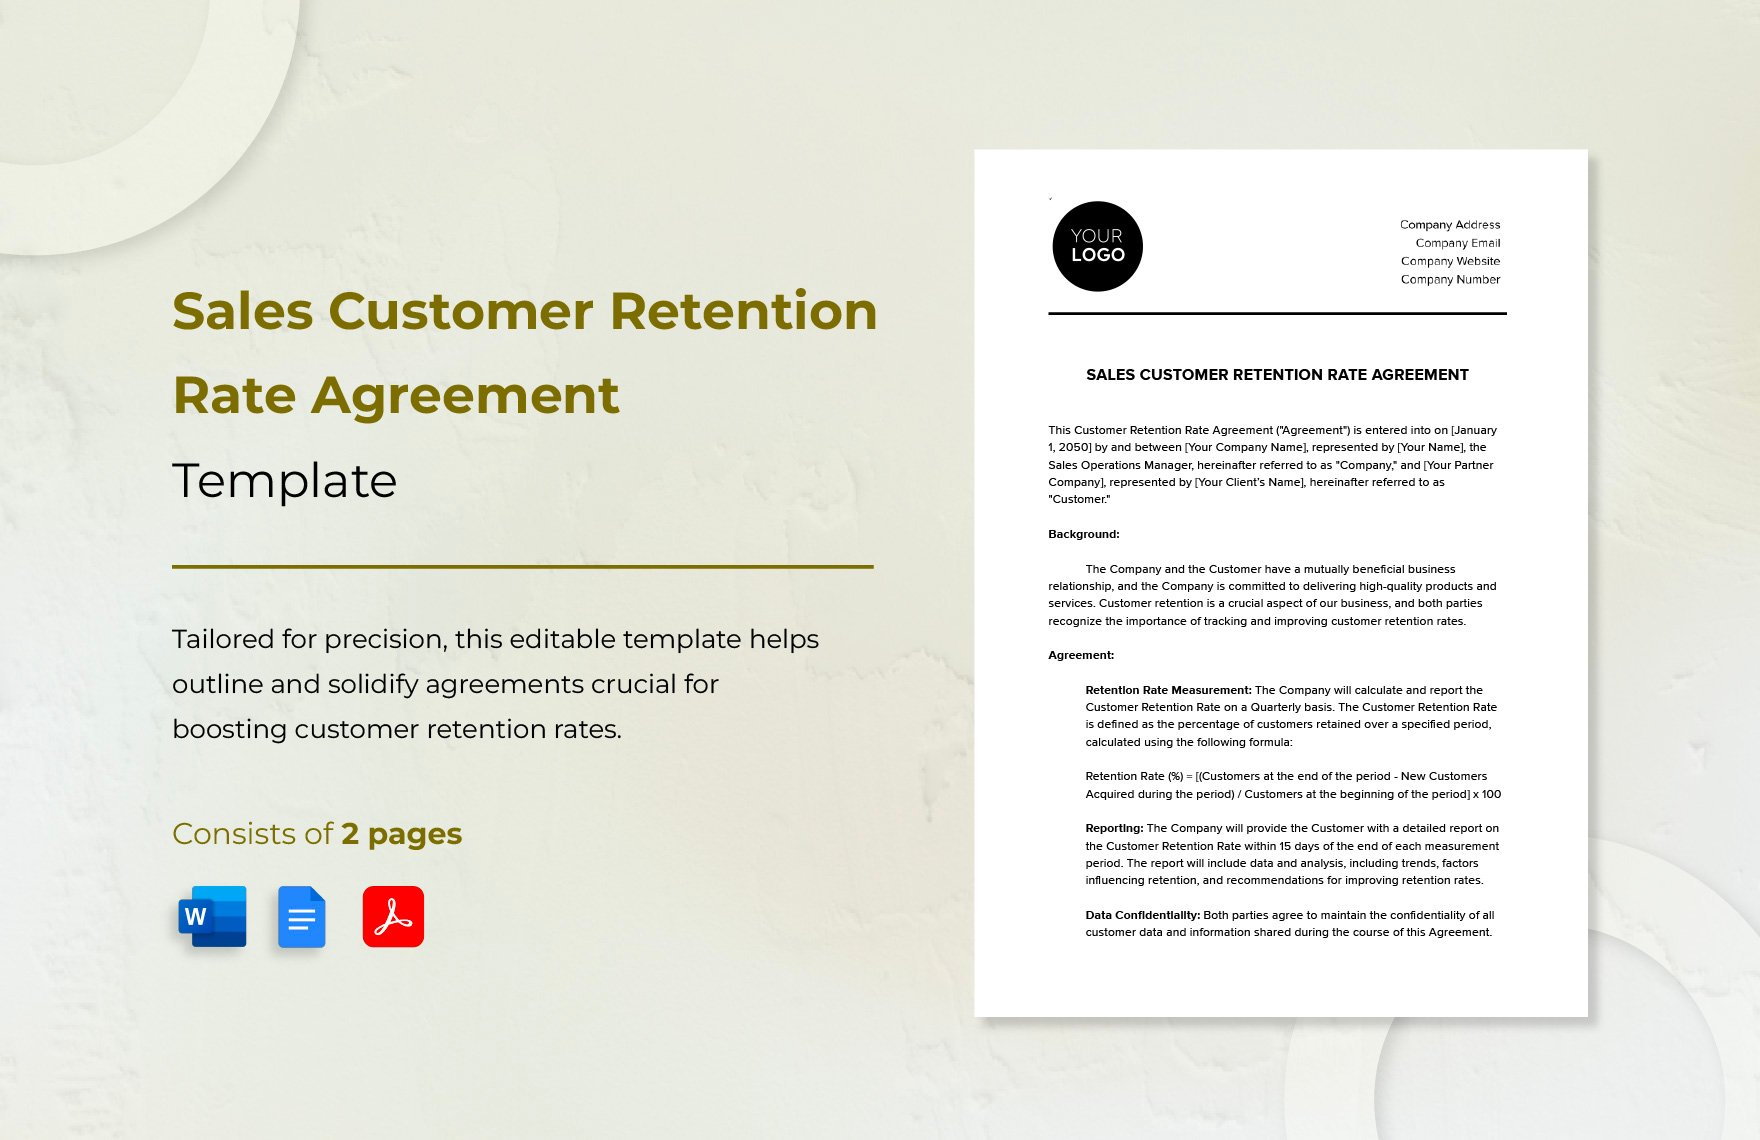 Sales Customer Retention Rate Agreement Template